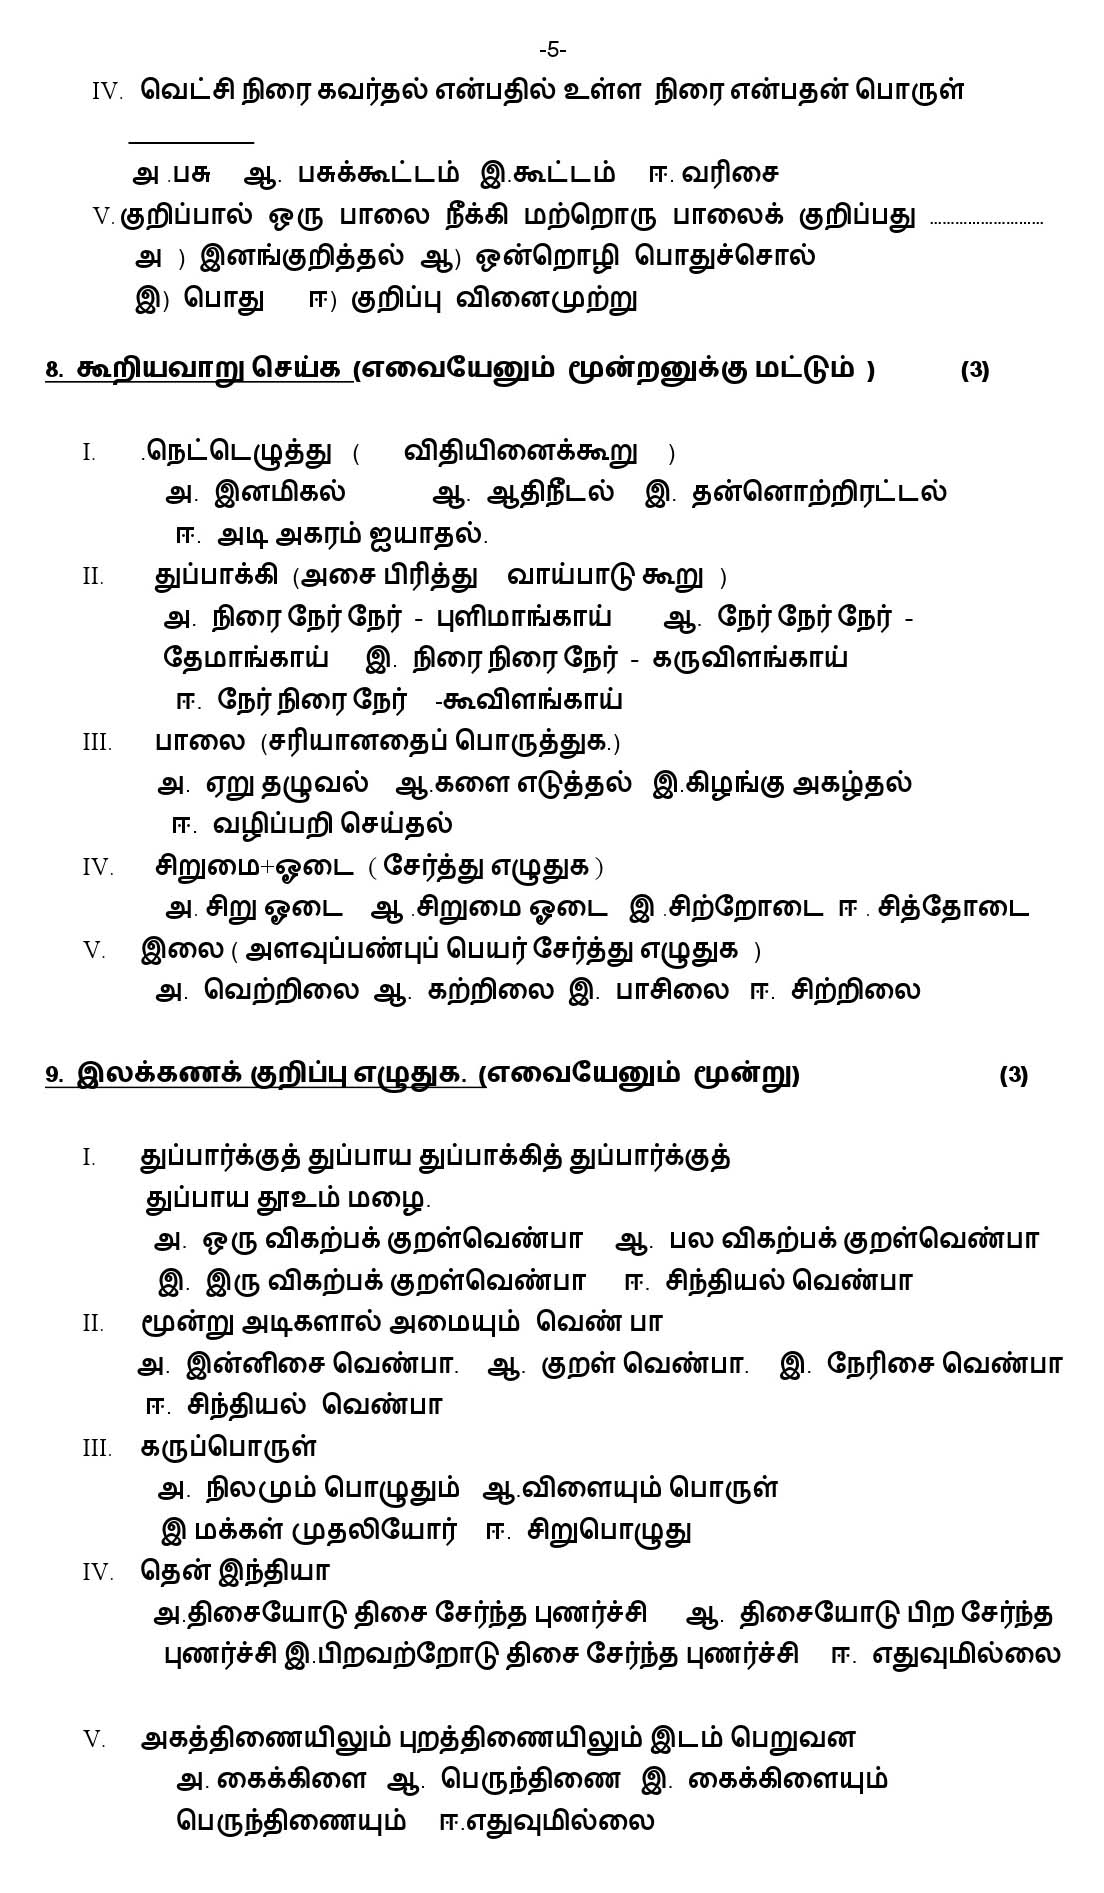 Tamil CBSE Class X Sample Question Paper 2018-19 - Image 5